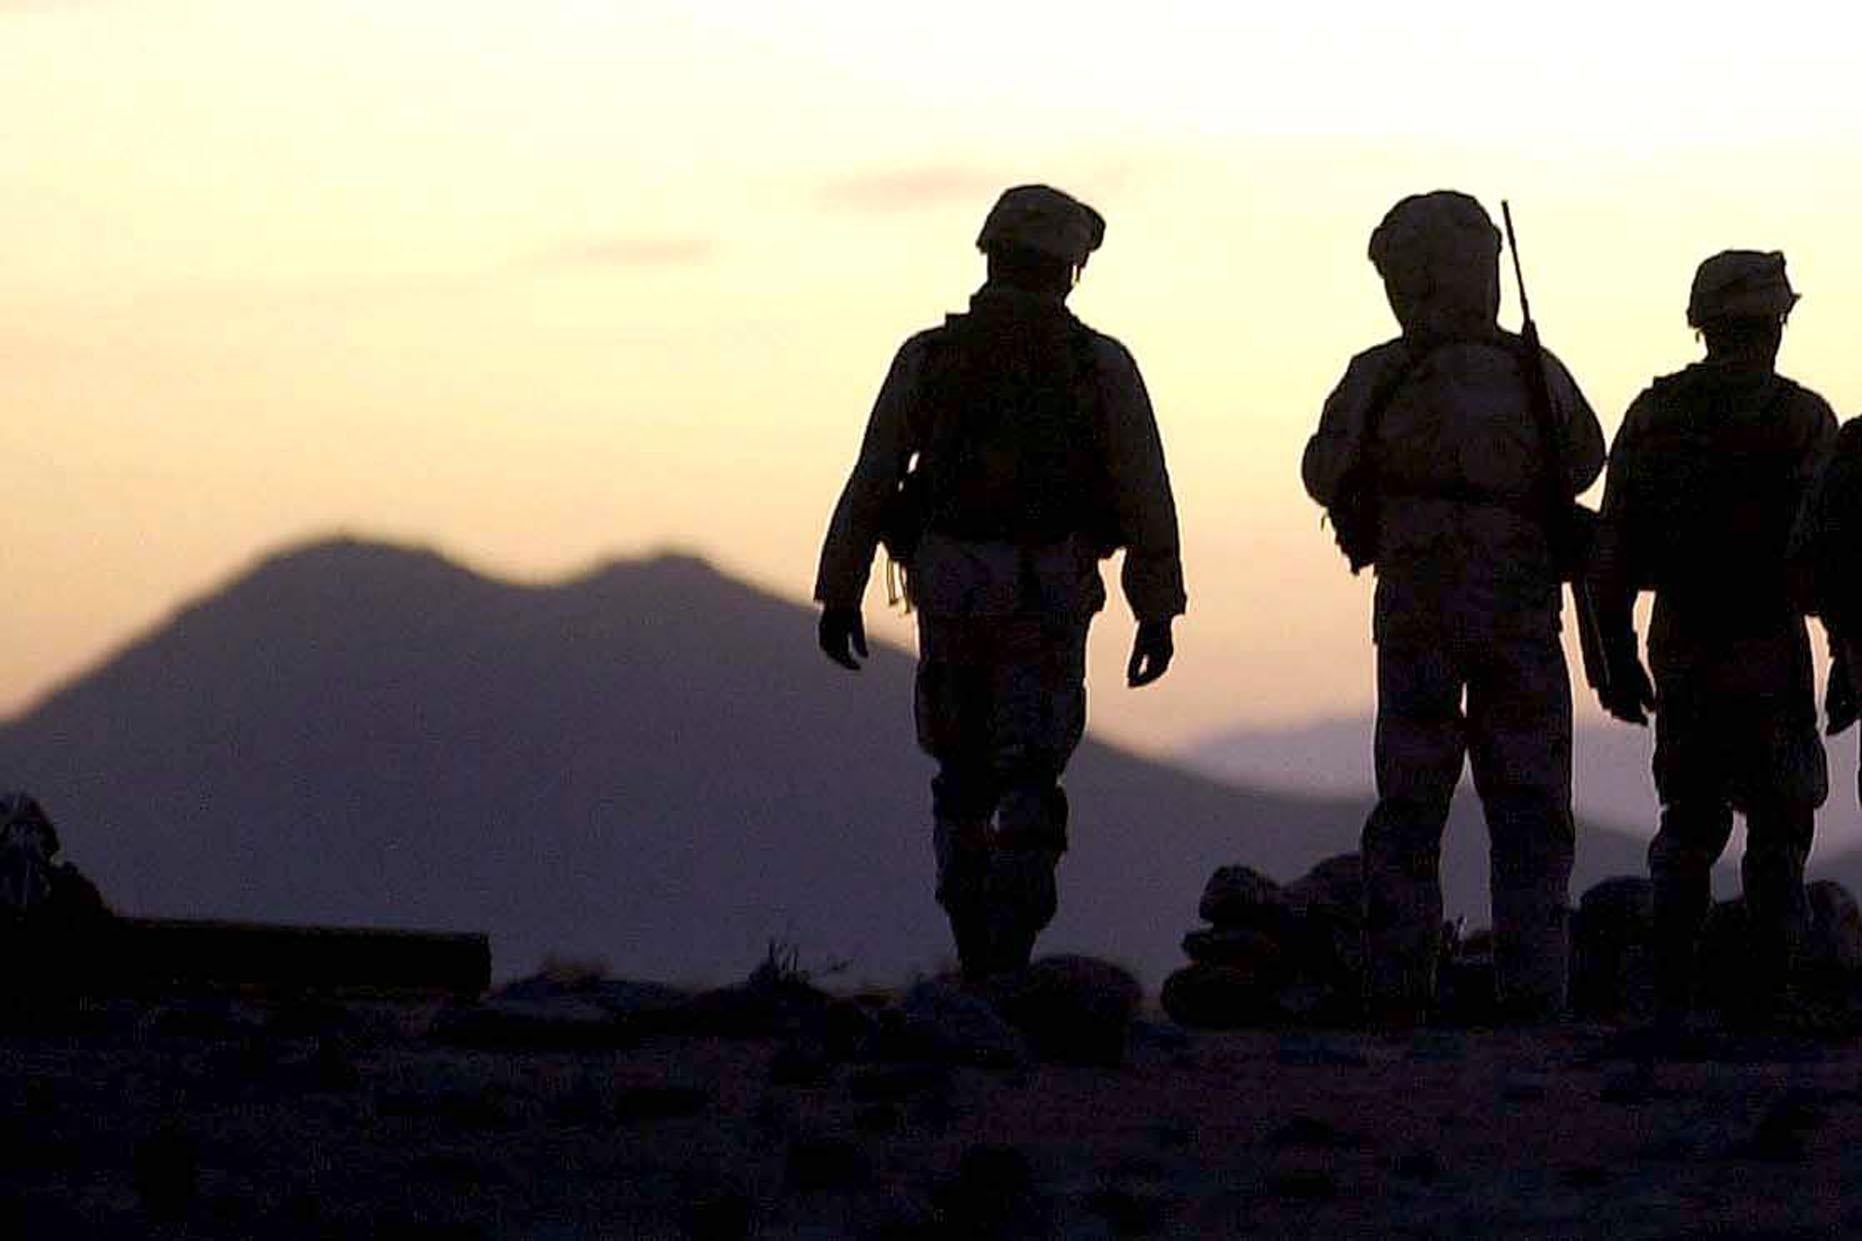 U.S. soldiers in silhouette on a hilltop in Afghanistan.